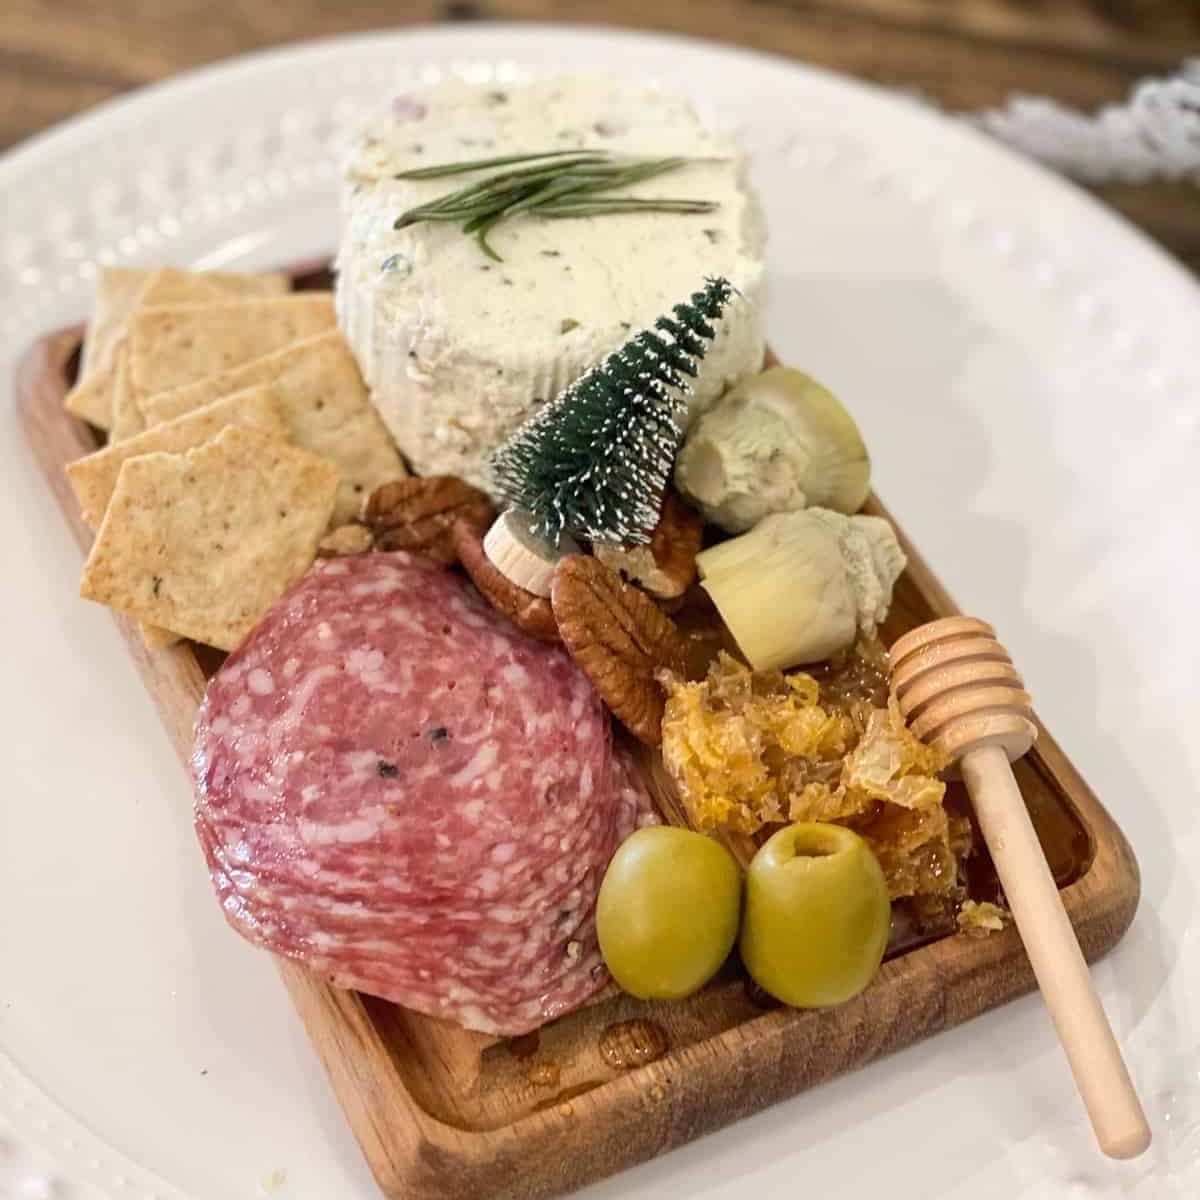 How to Make a Wedding Charcuterie Board, According to Experts